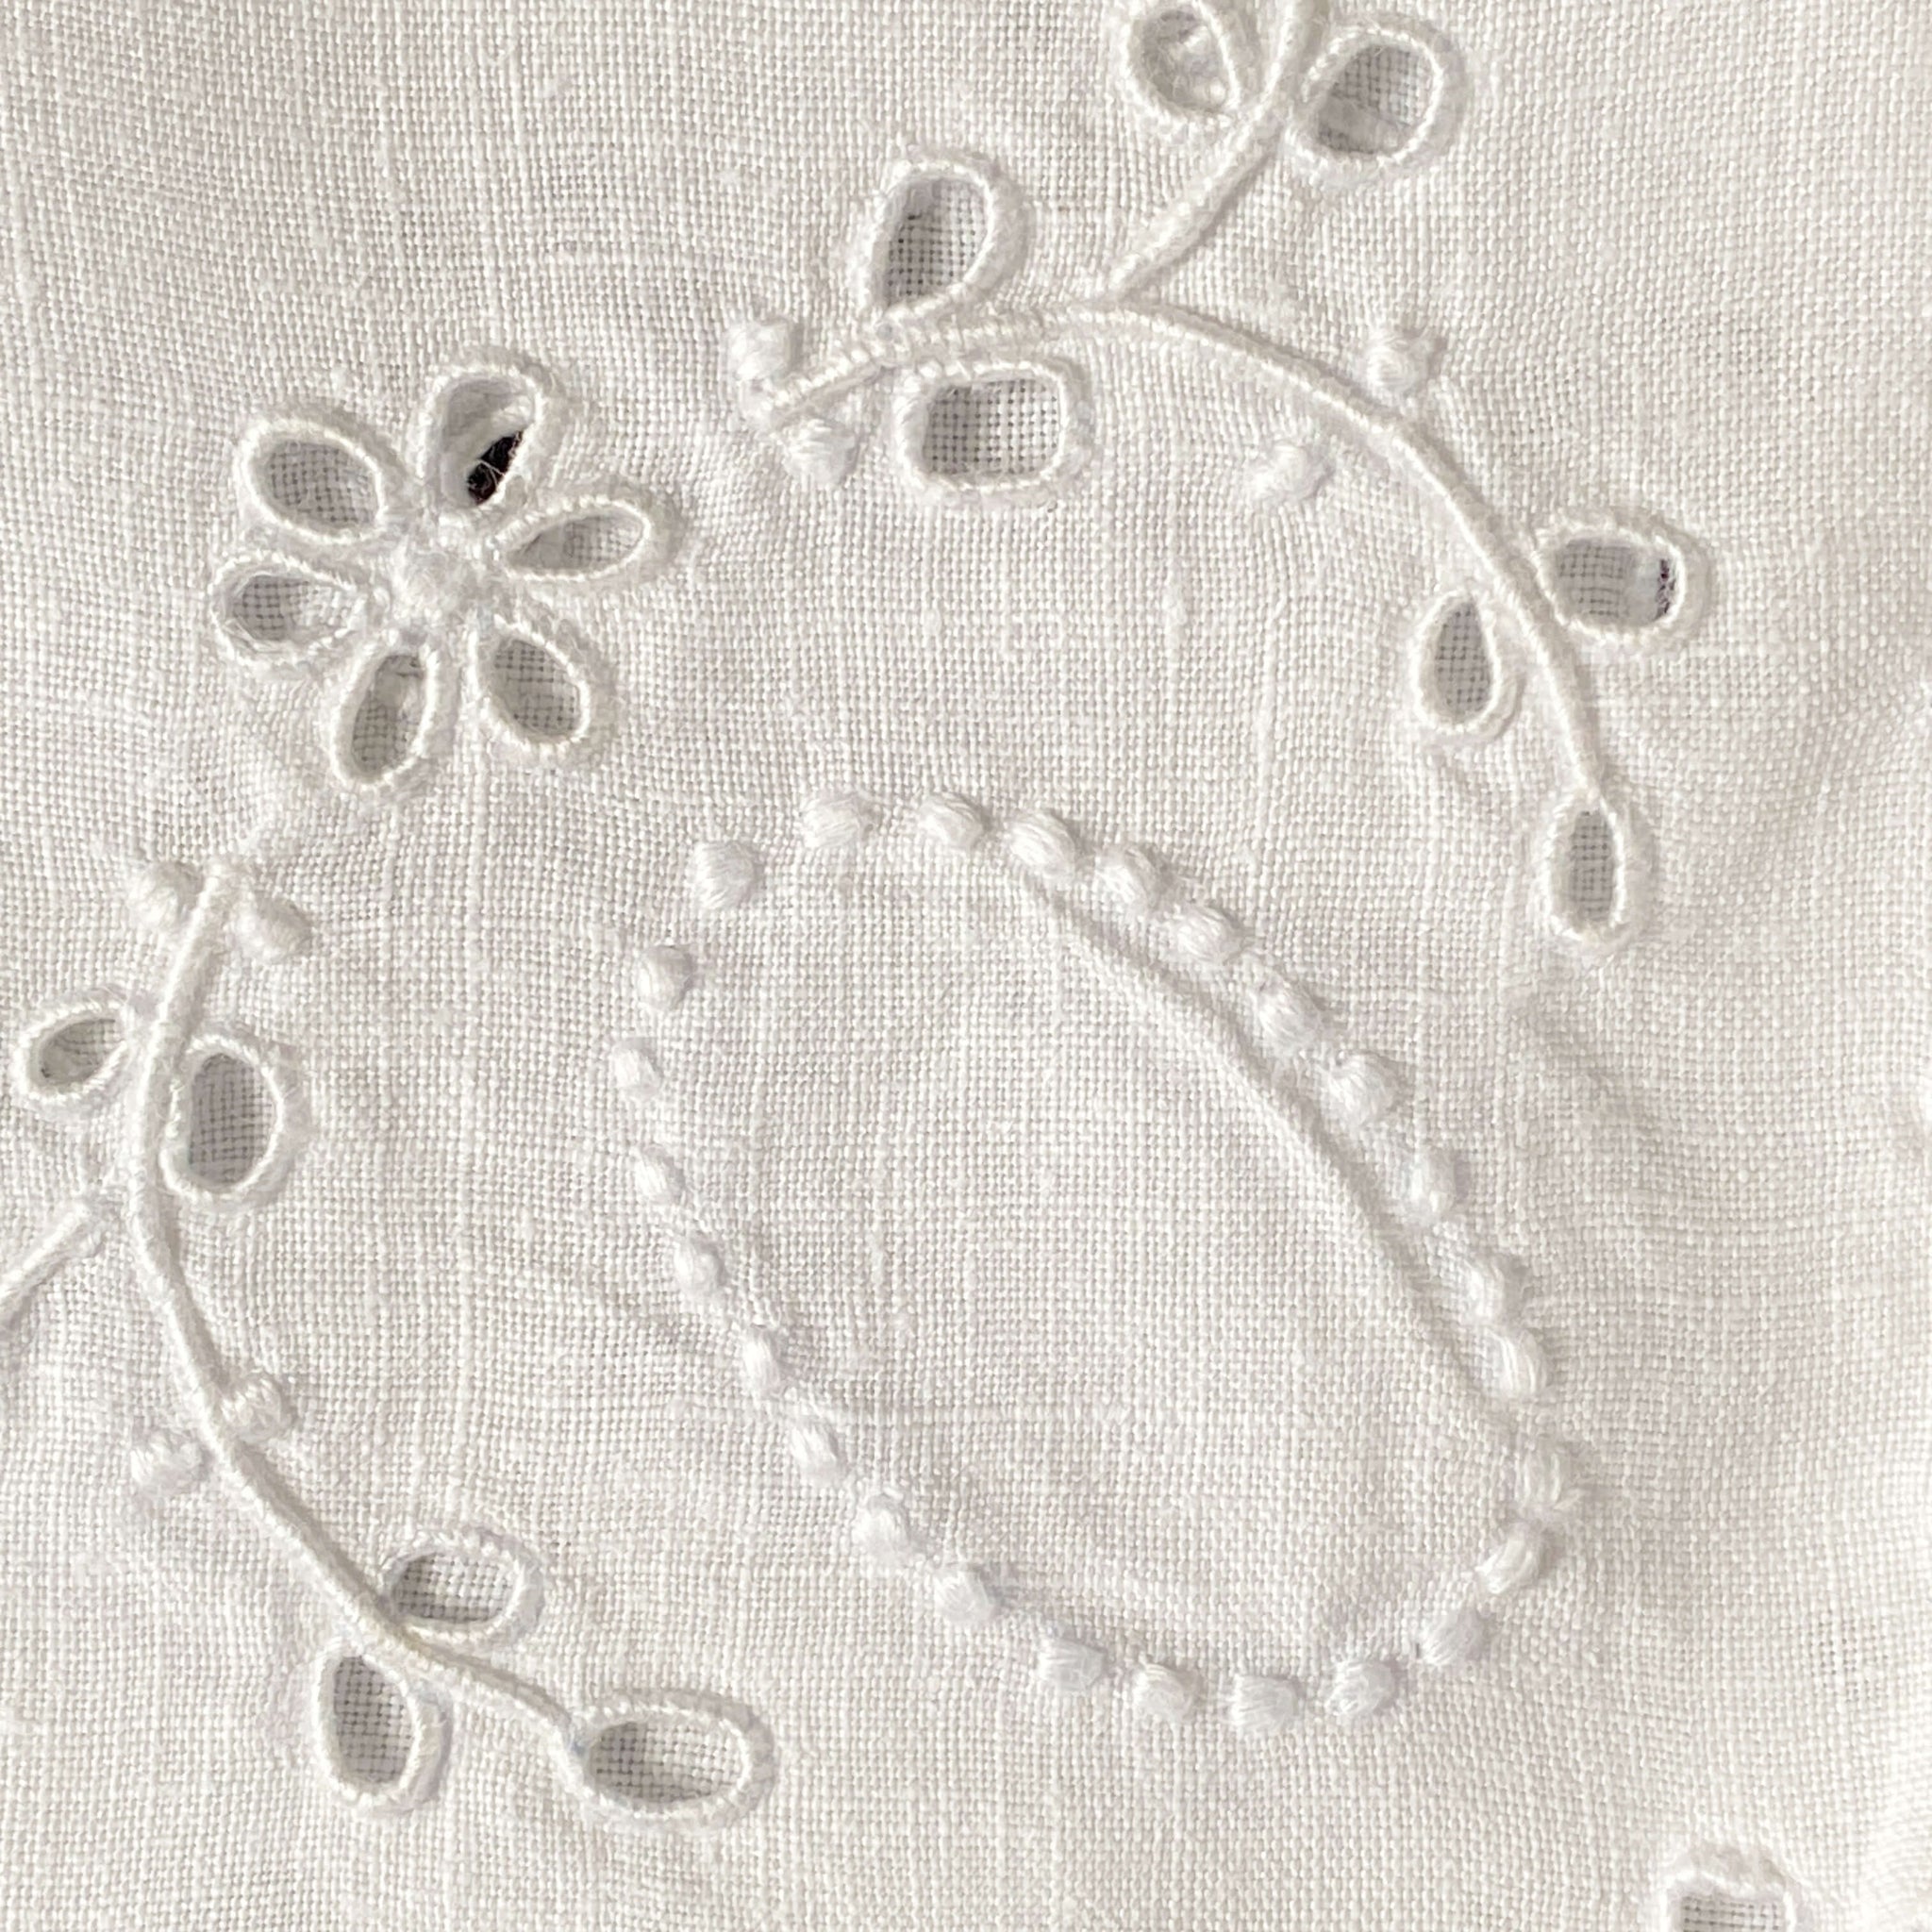 Vintage Embroidered Luncheon Napkins with Broderie Eyelet Flowers and French Knot Design- Set of Four